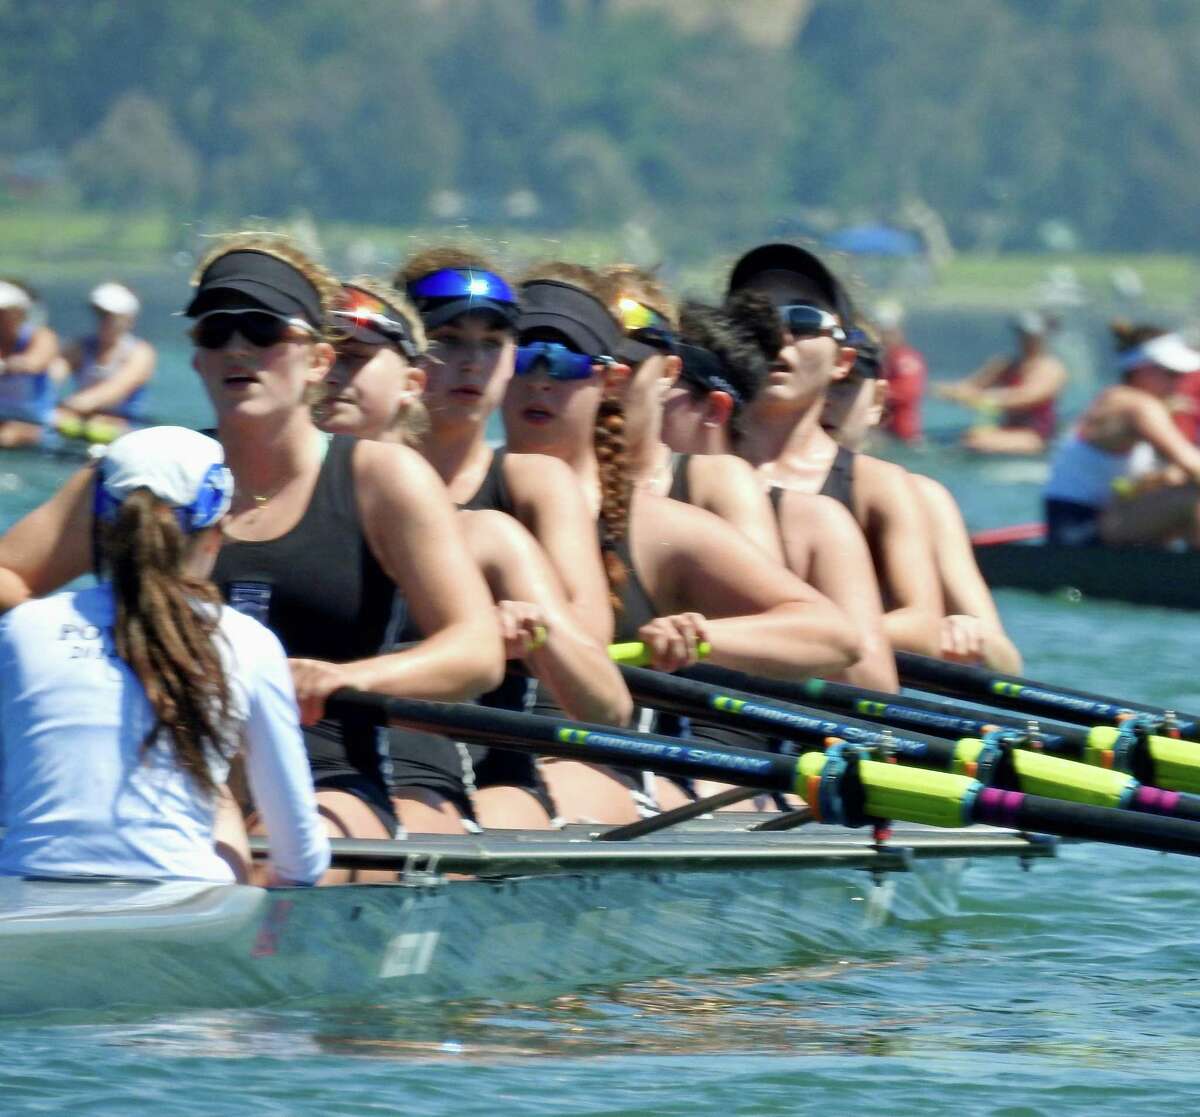 ROWING Number of U.S. high school athletes 2016-17: Men: 2,434    Women: 2,745 Number participating in college: Men: 6,043       Women: 3,001 (Note: Rowing is a sport with such a disproportionate number of club participants in high school that the percentage of high school rowers participating in college is difficult to accurately measure. Still, the opportunity to participate for the high school rower in college is obviously huge)